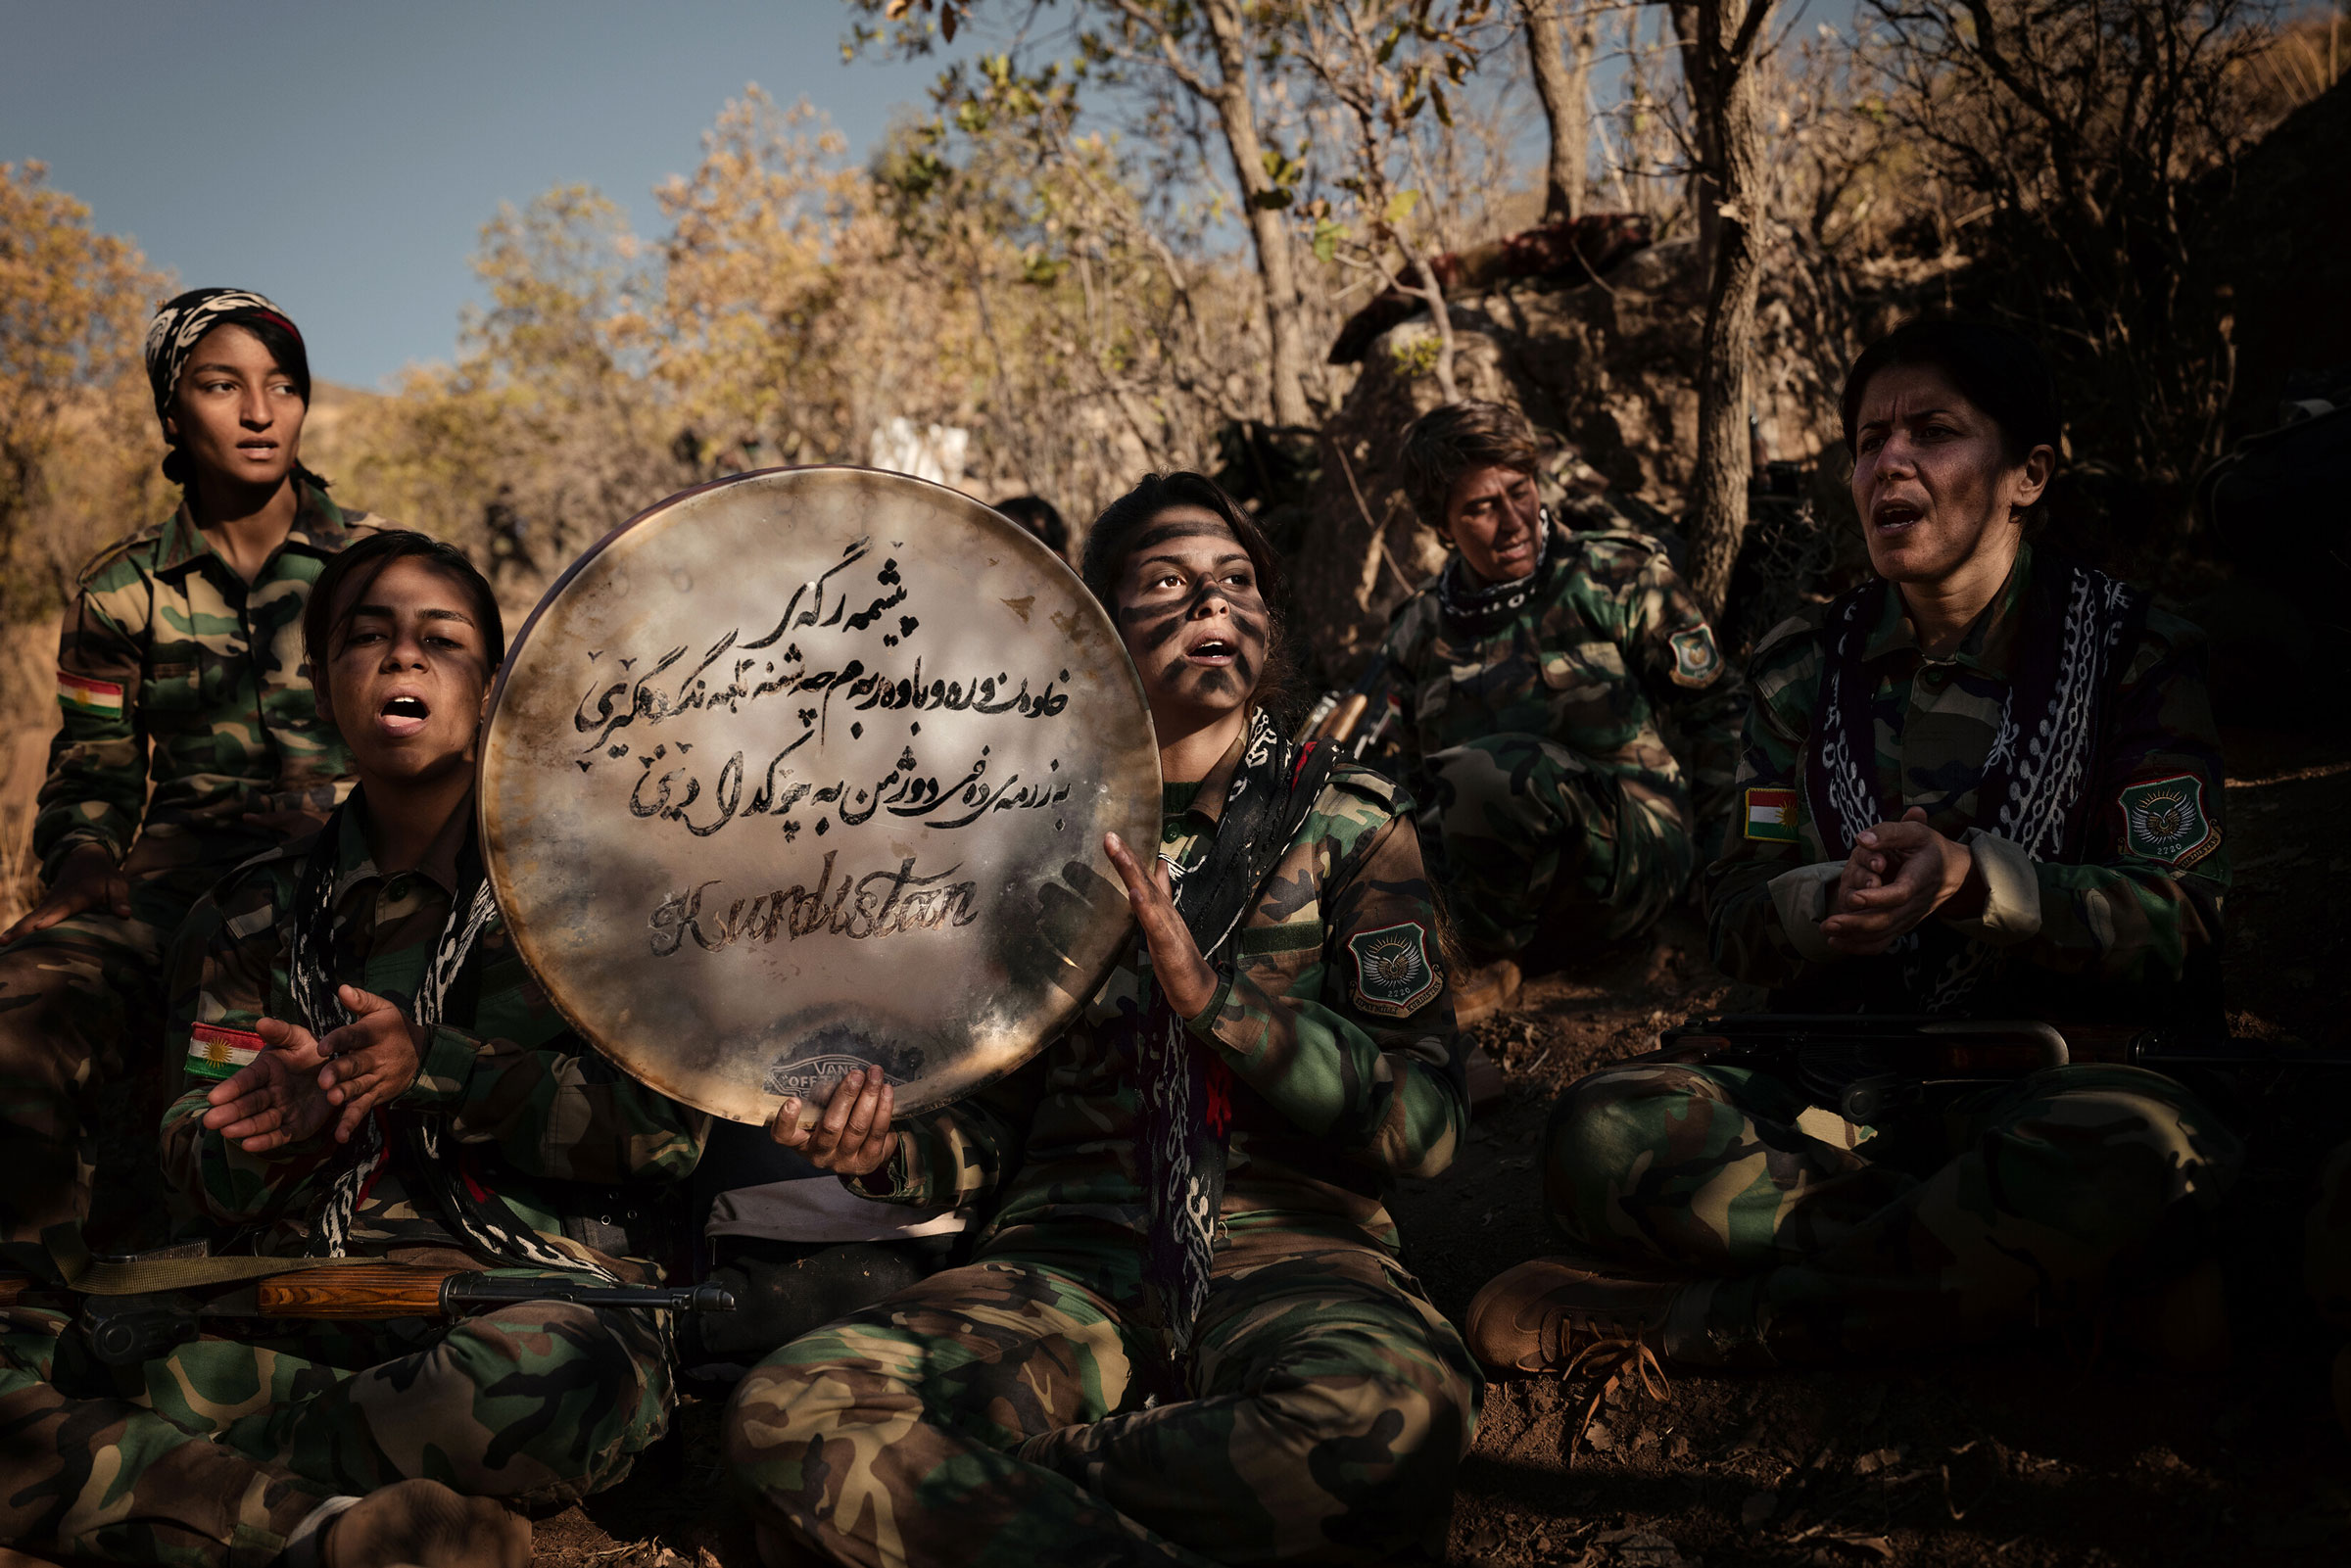 Female members of the Iranian opposition group Kurdistan Freedom Party (P.A.K.) sing protest songs in the Kurdistan Region of Iraq, on Nov. 15, 2022. (Emily Garthwaite—The New York Times/Redux)